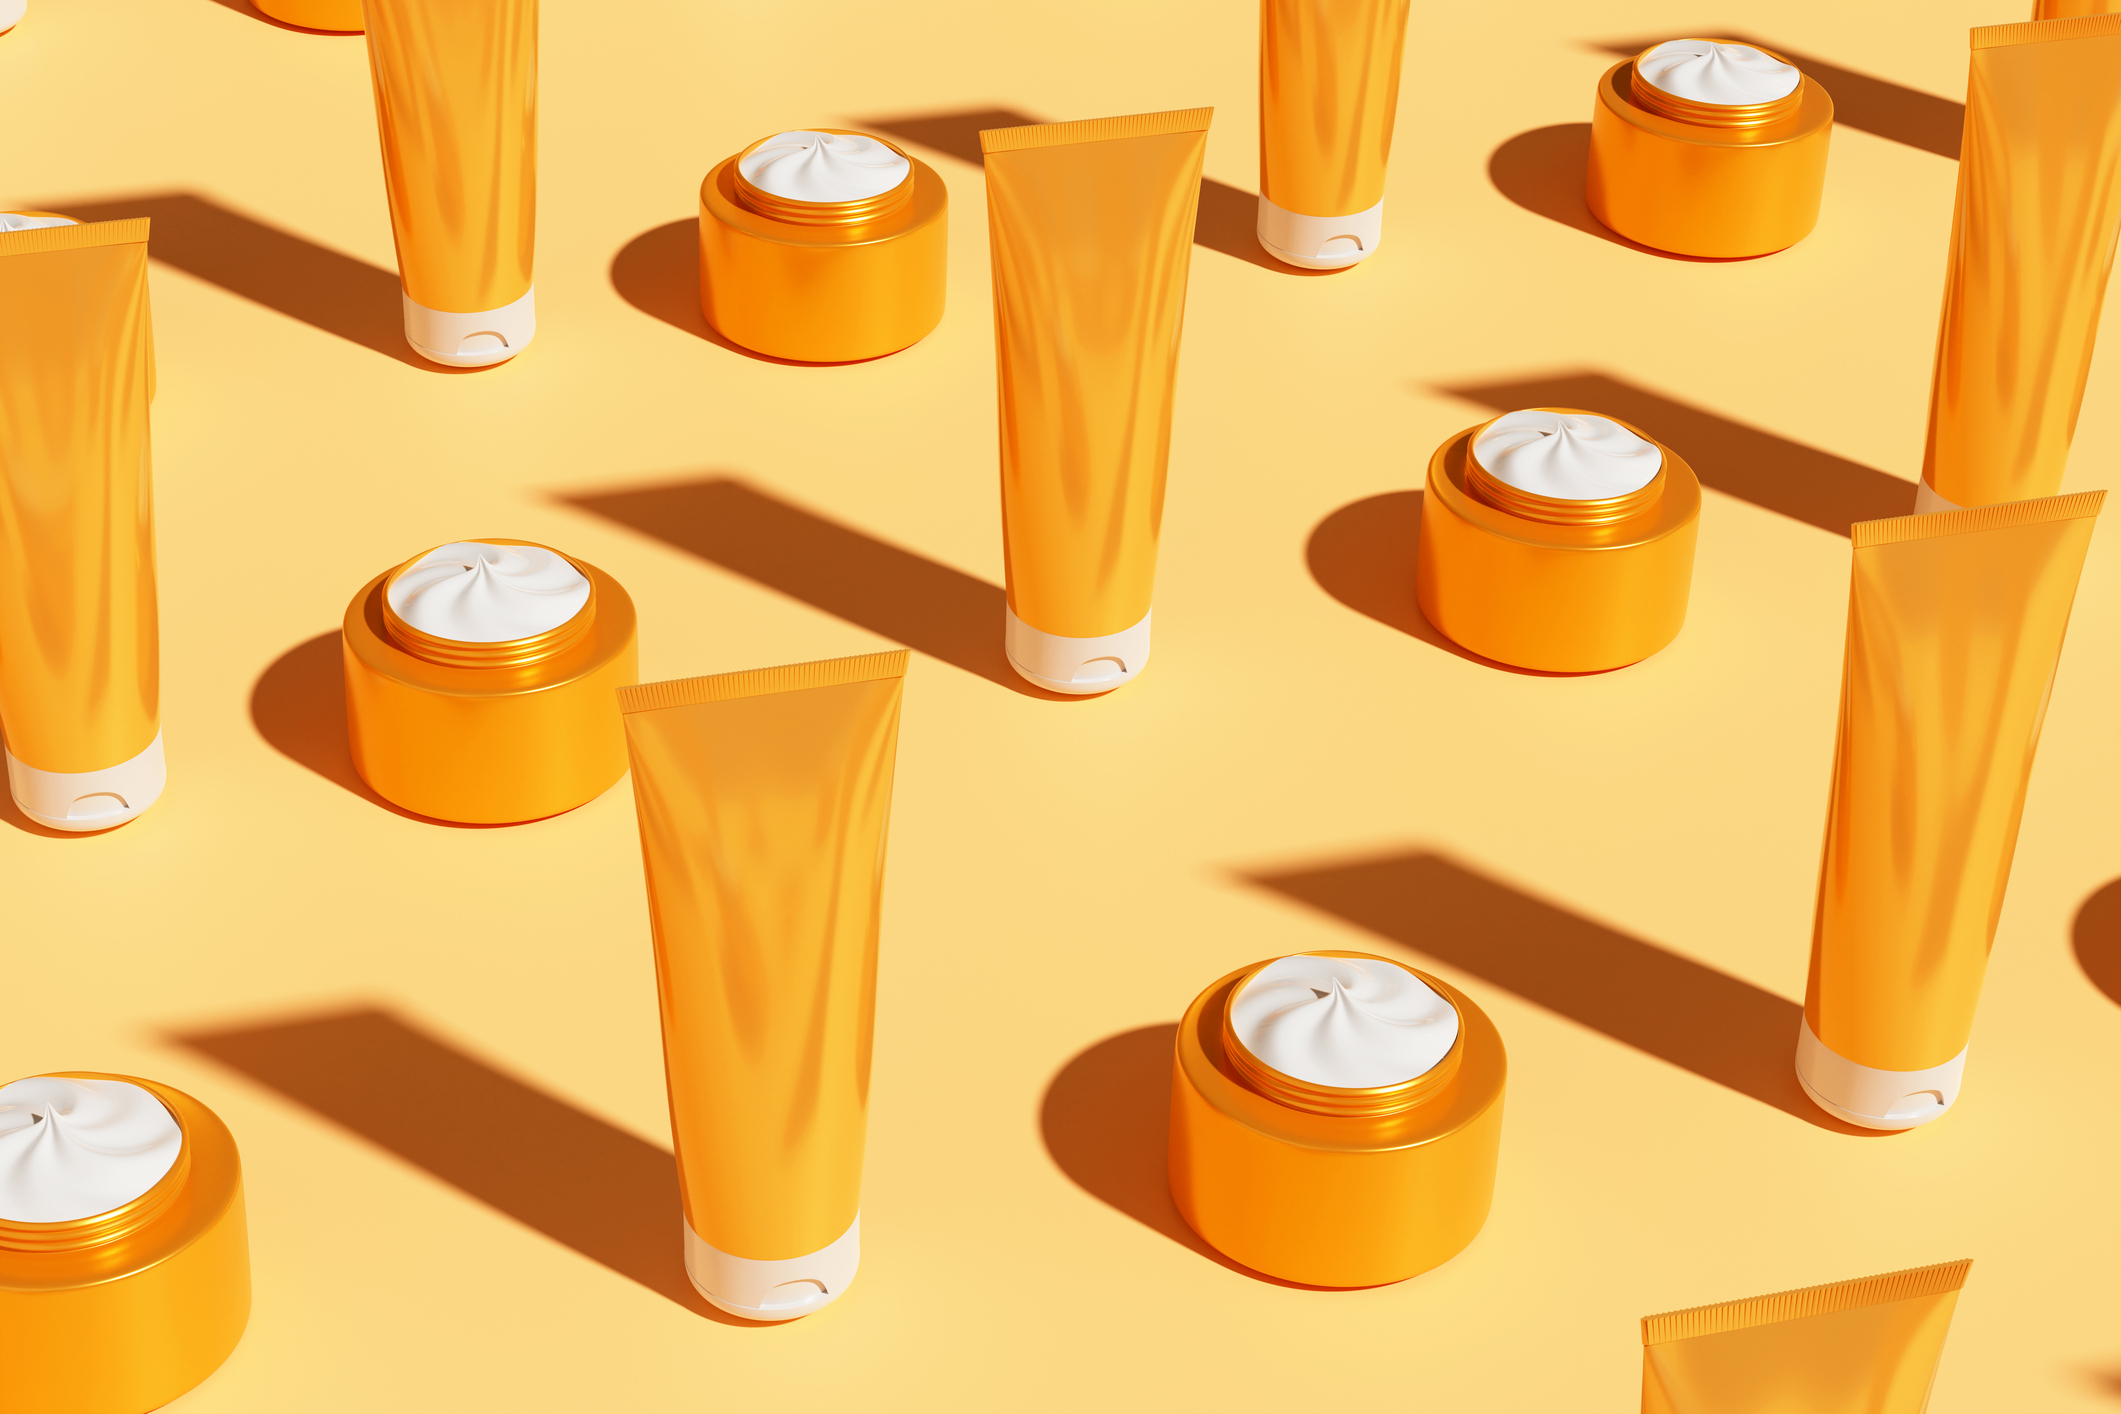 Sunscreen containers on a yellow background. 